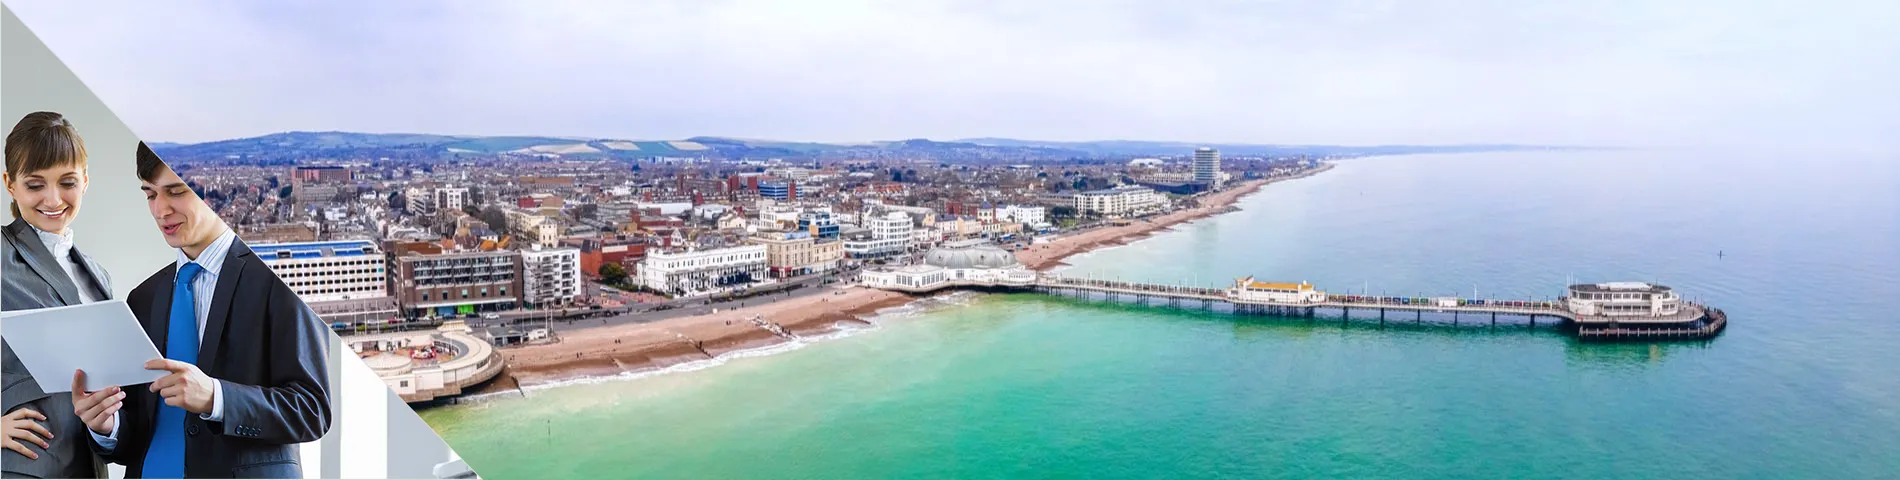 Worthing - Business One-to-One